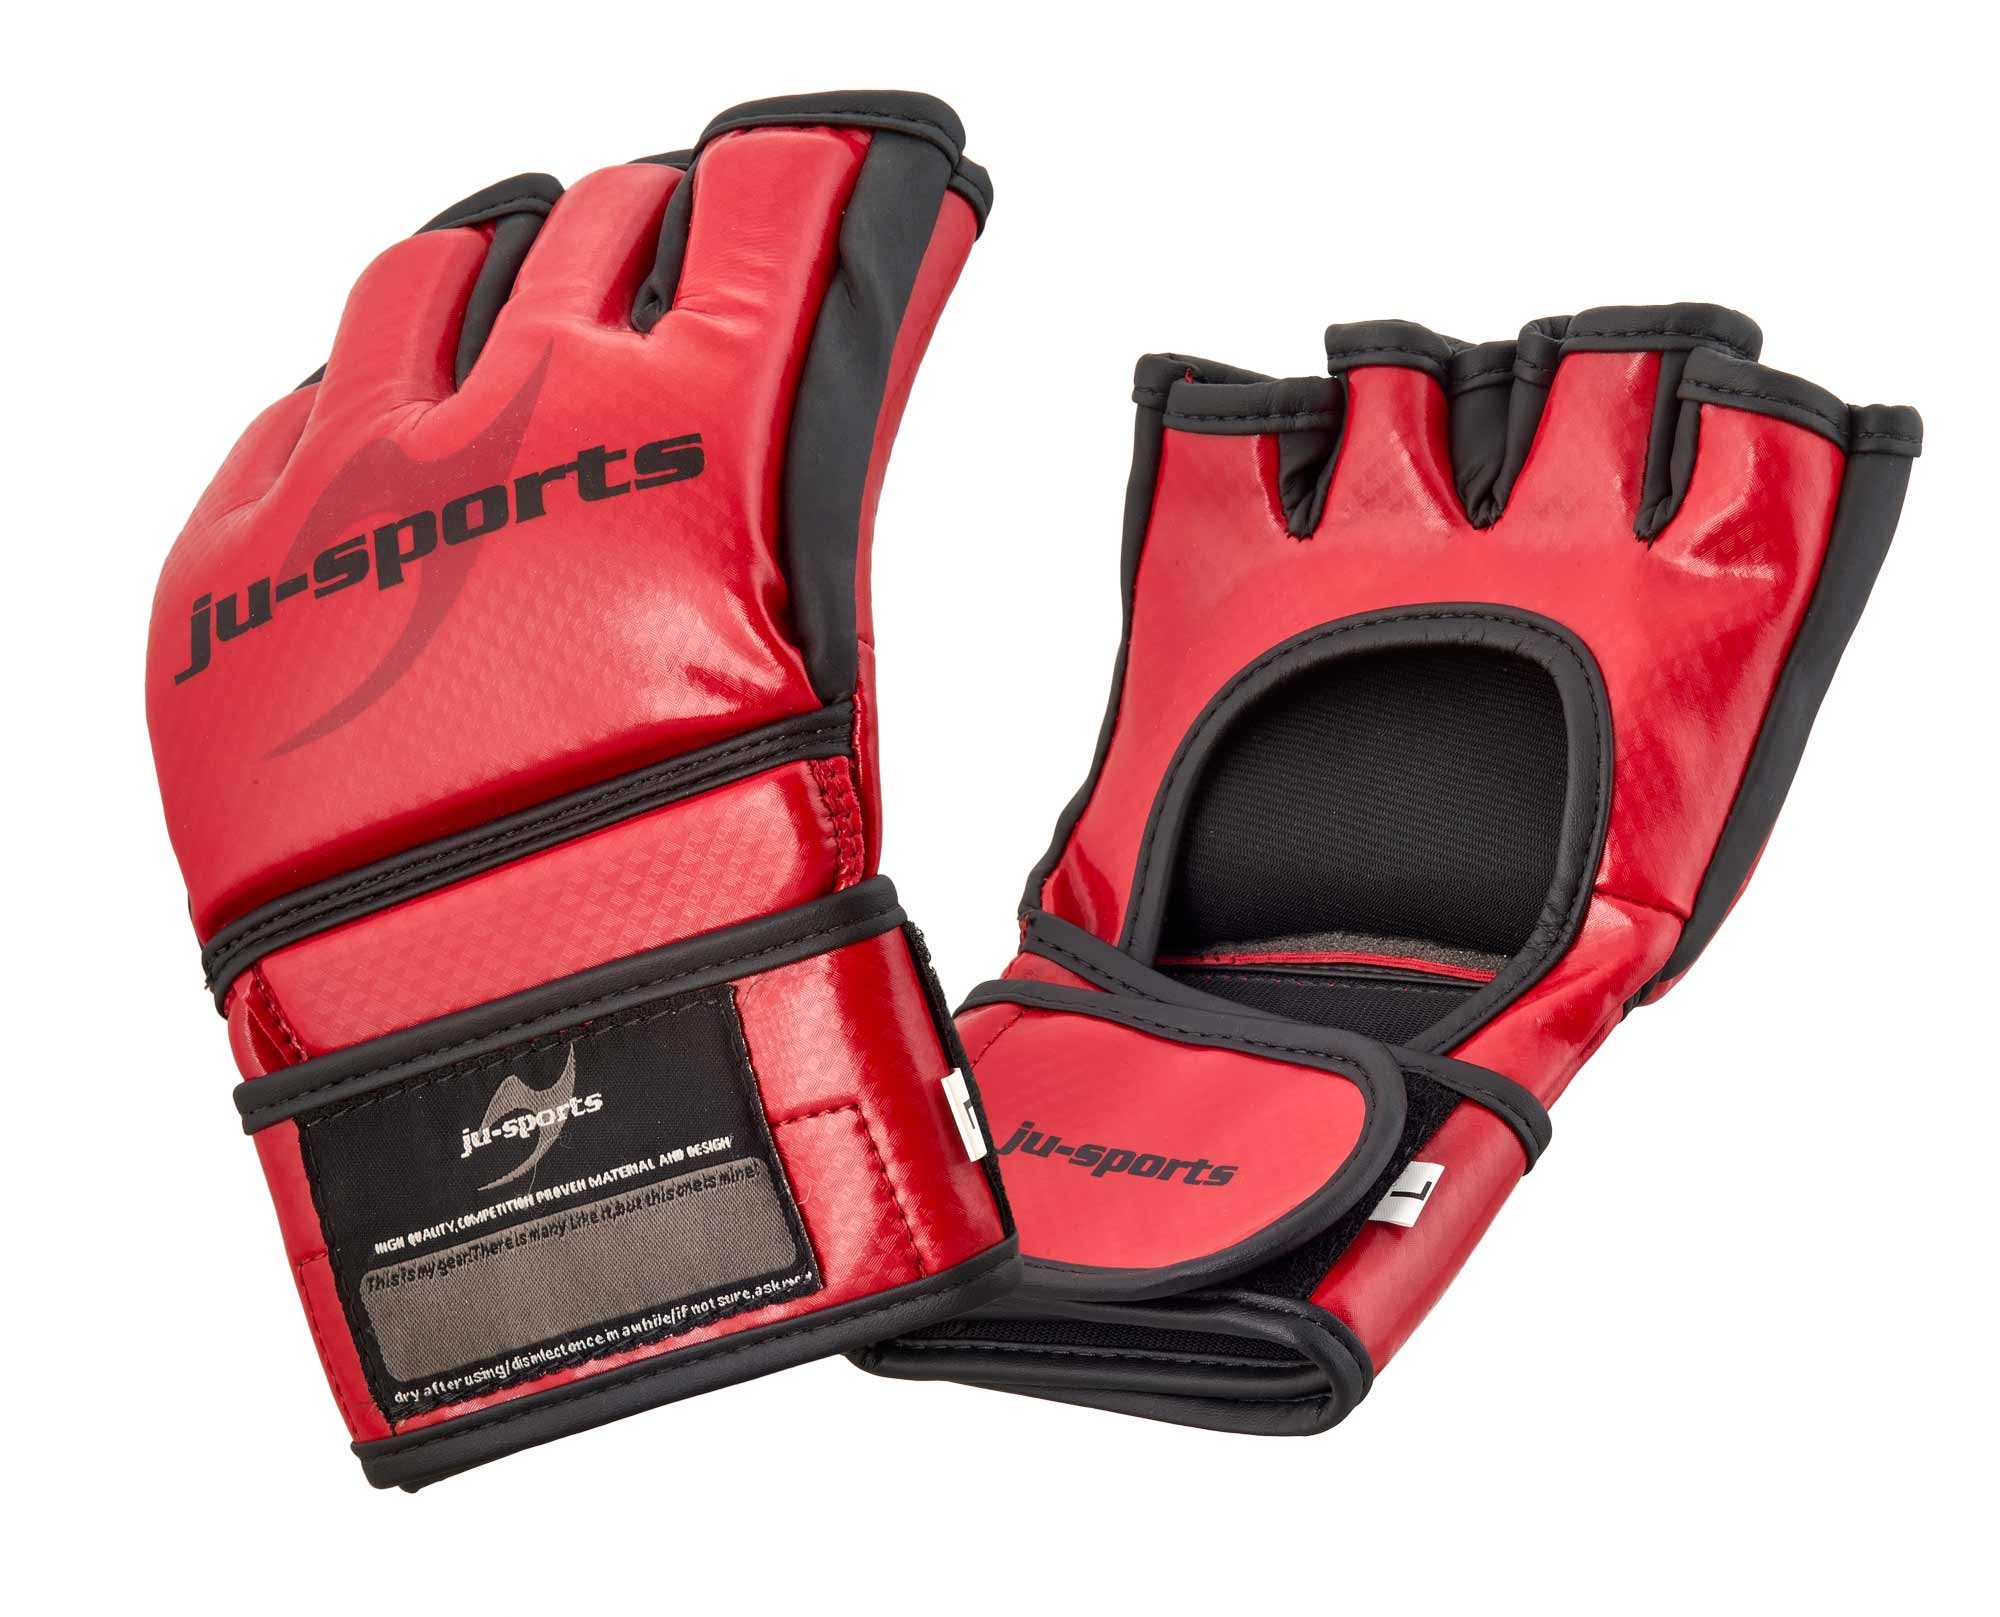 MMA Competition Pro red ju-sports - Carbon Wettkampf-Handschuh